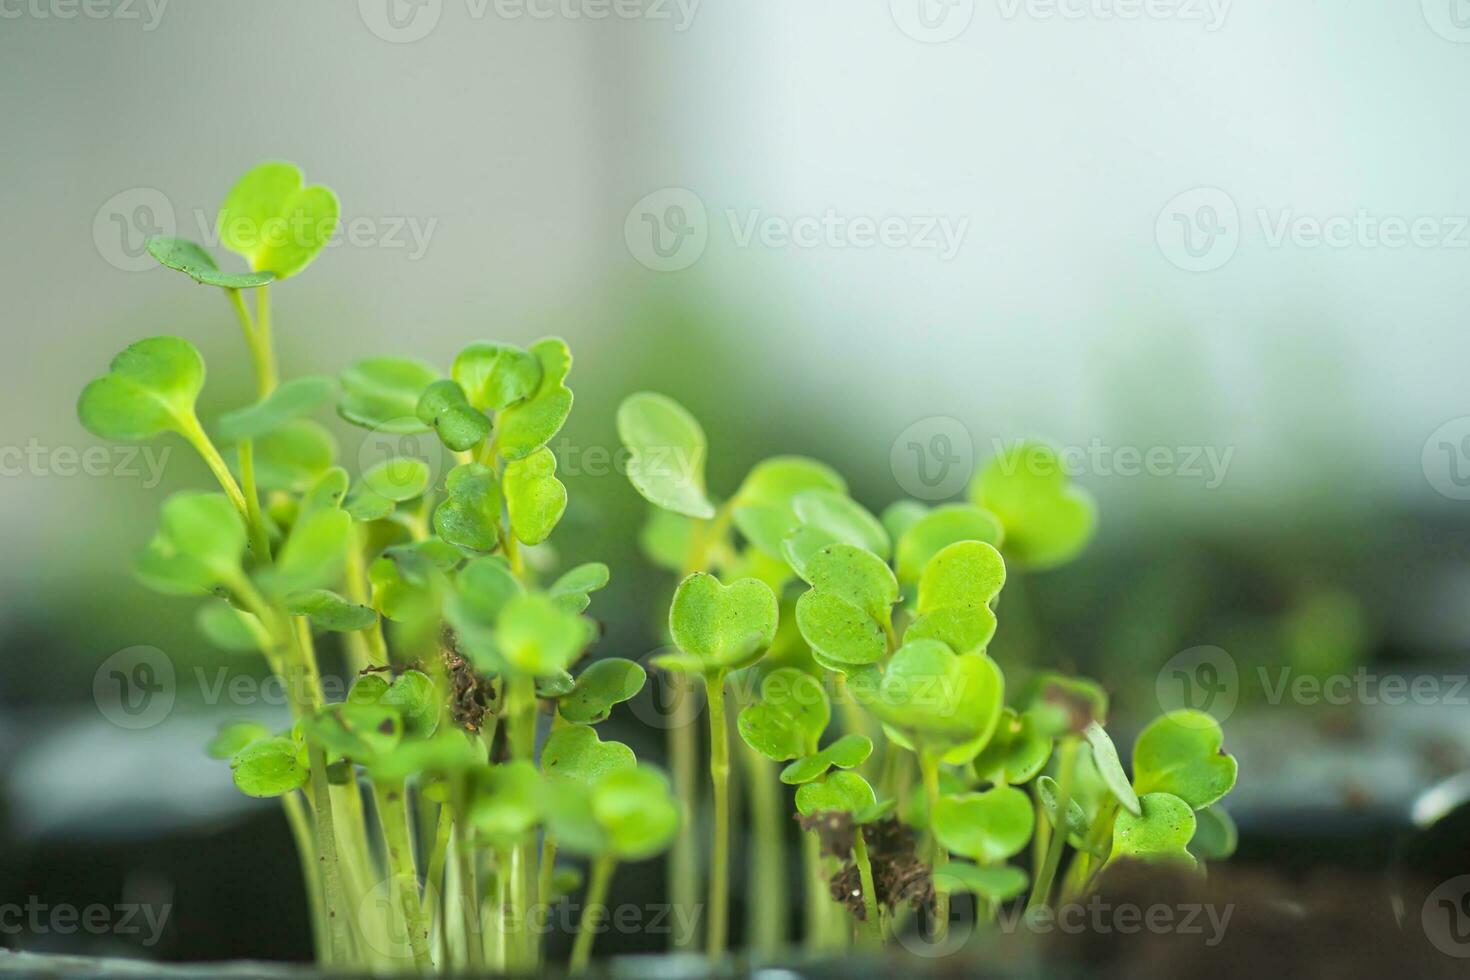 Microgreen arugula sprouts into seedling pots. Raw sprouts, microgreens, healthy eating concept. superfood grown at home photo